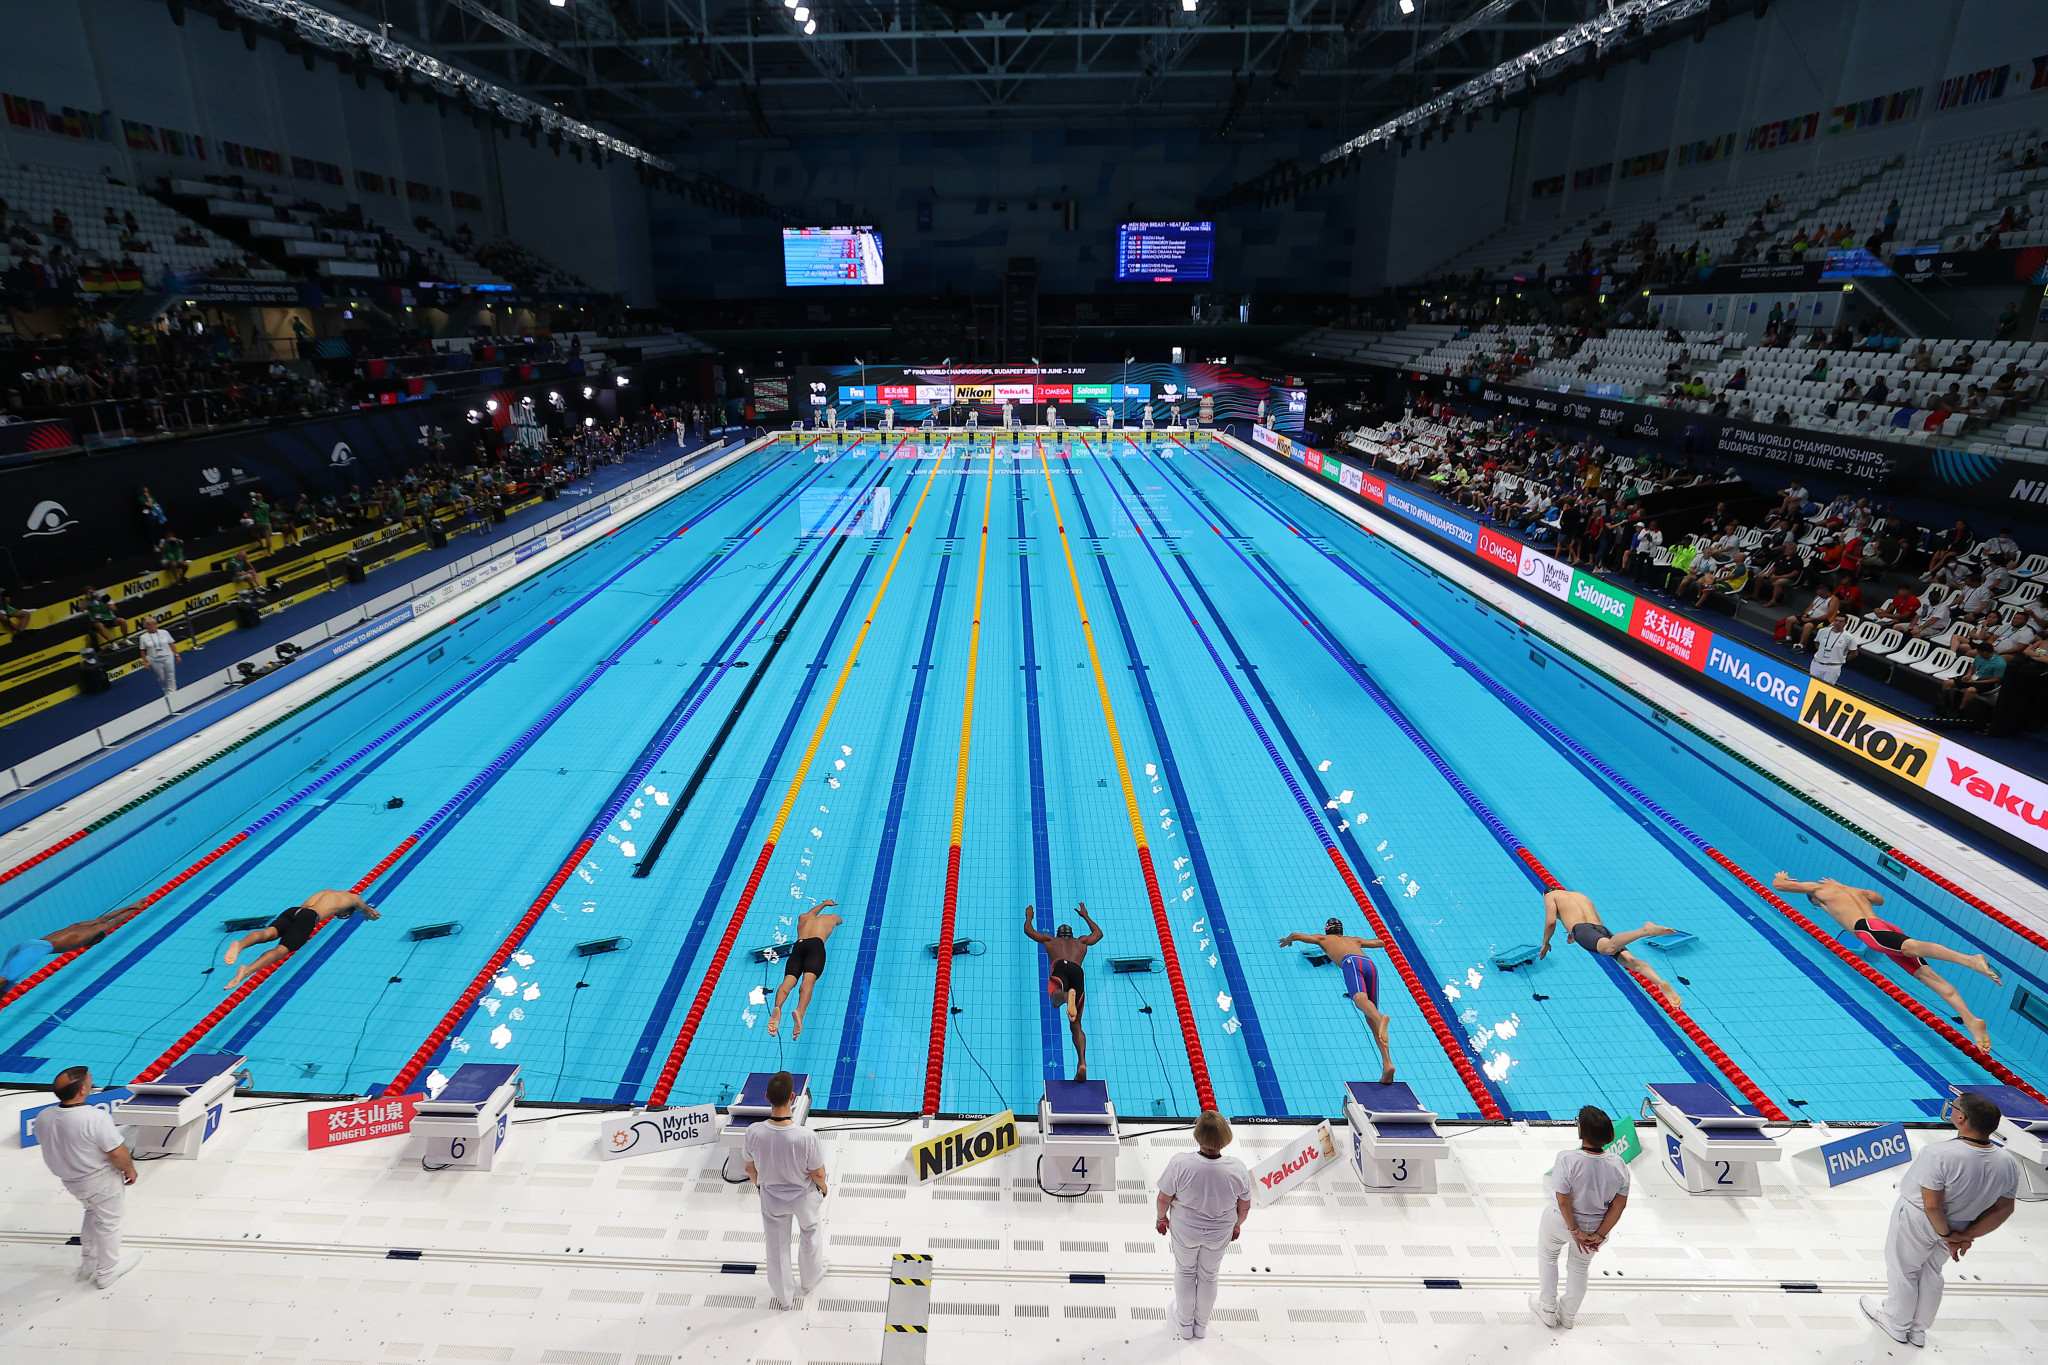 The ITA is coordinating doping control at the FINA World Championships in Budapest ©Getty Images